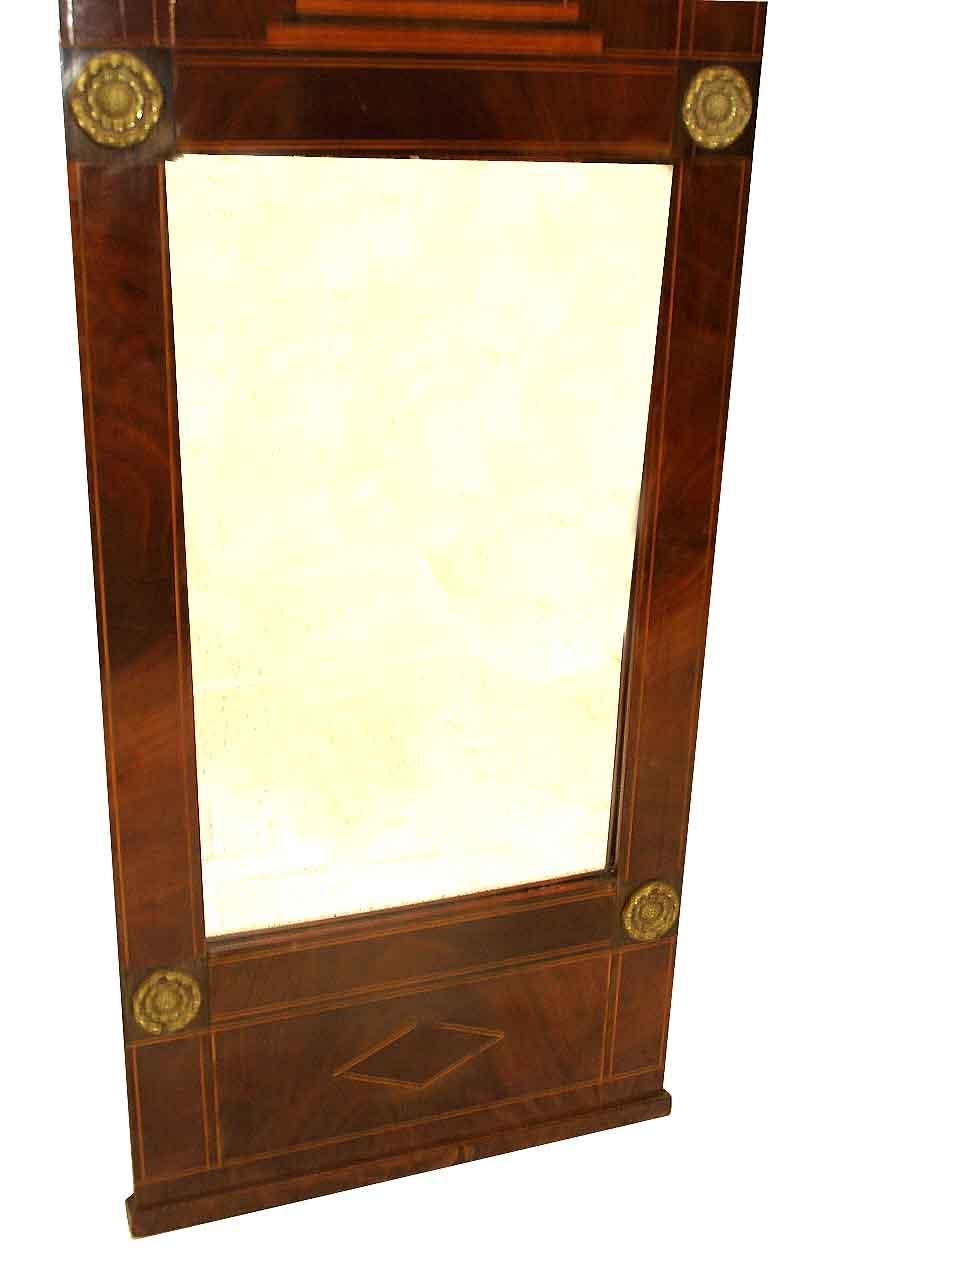 English Mahogany Inlaid Mirror In Good Condition For Sale In Wilson, NC